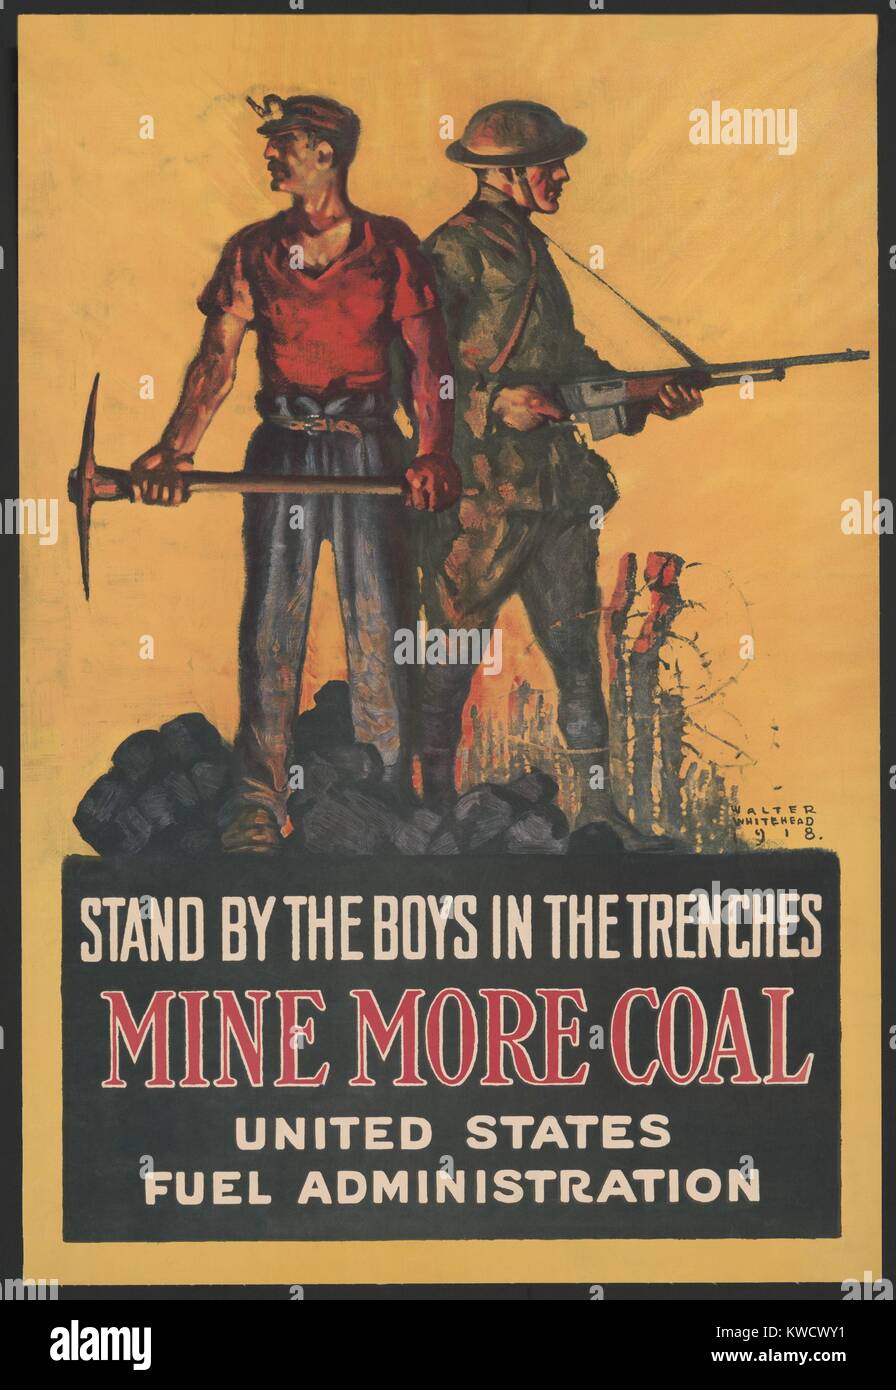 STAND BY THE BOYS IN THE TRENCHES-MINE MORE COAL. American World War 1 poster of a miner with a pickaxe and a soldier with a rifle, 1918 (BSLOC 2017 1 55) Stock Photo